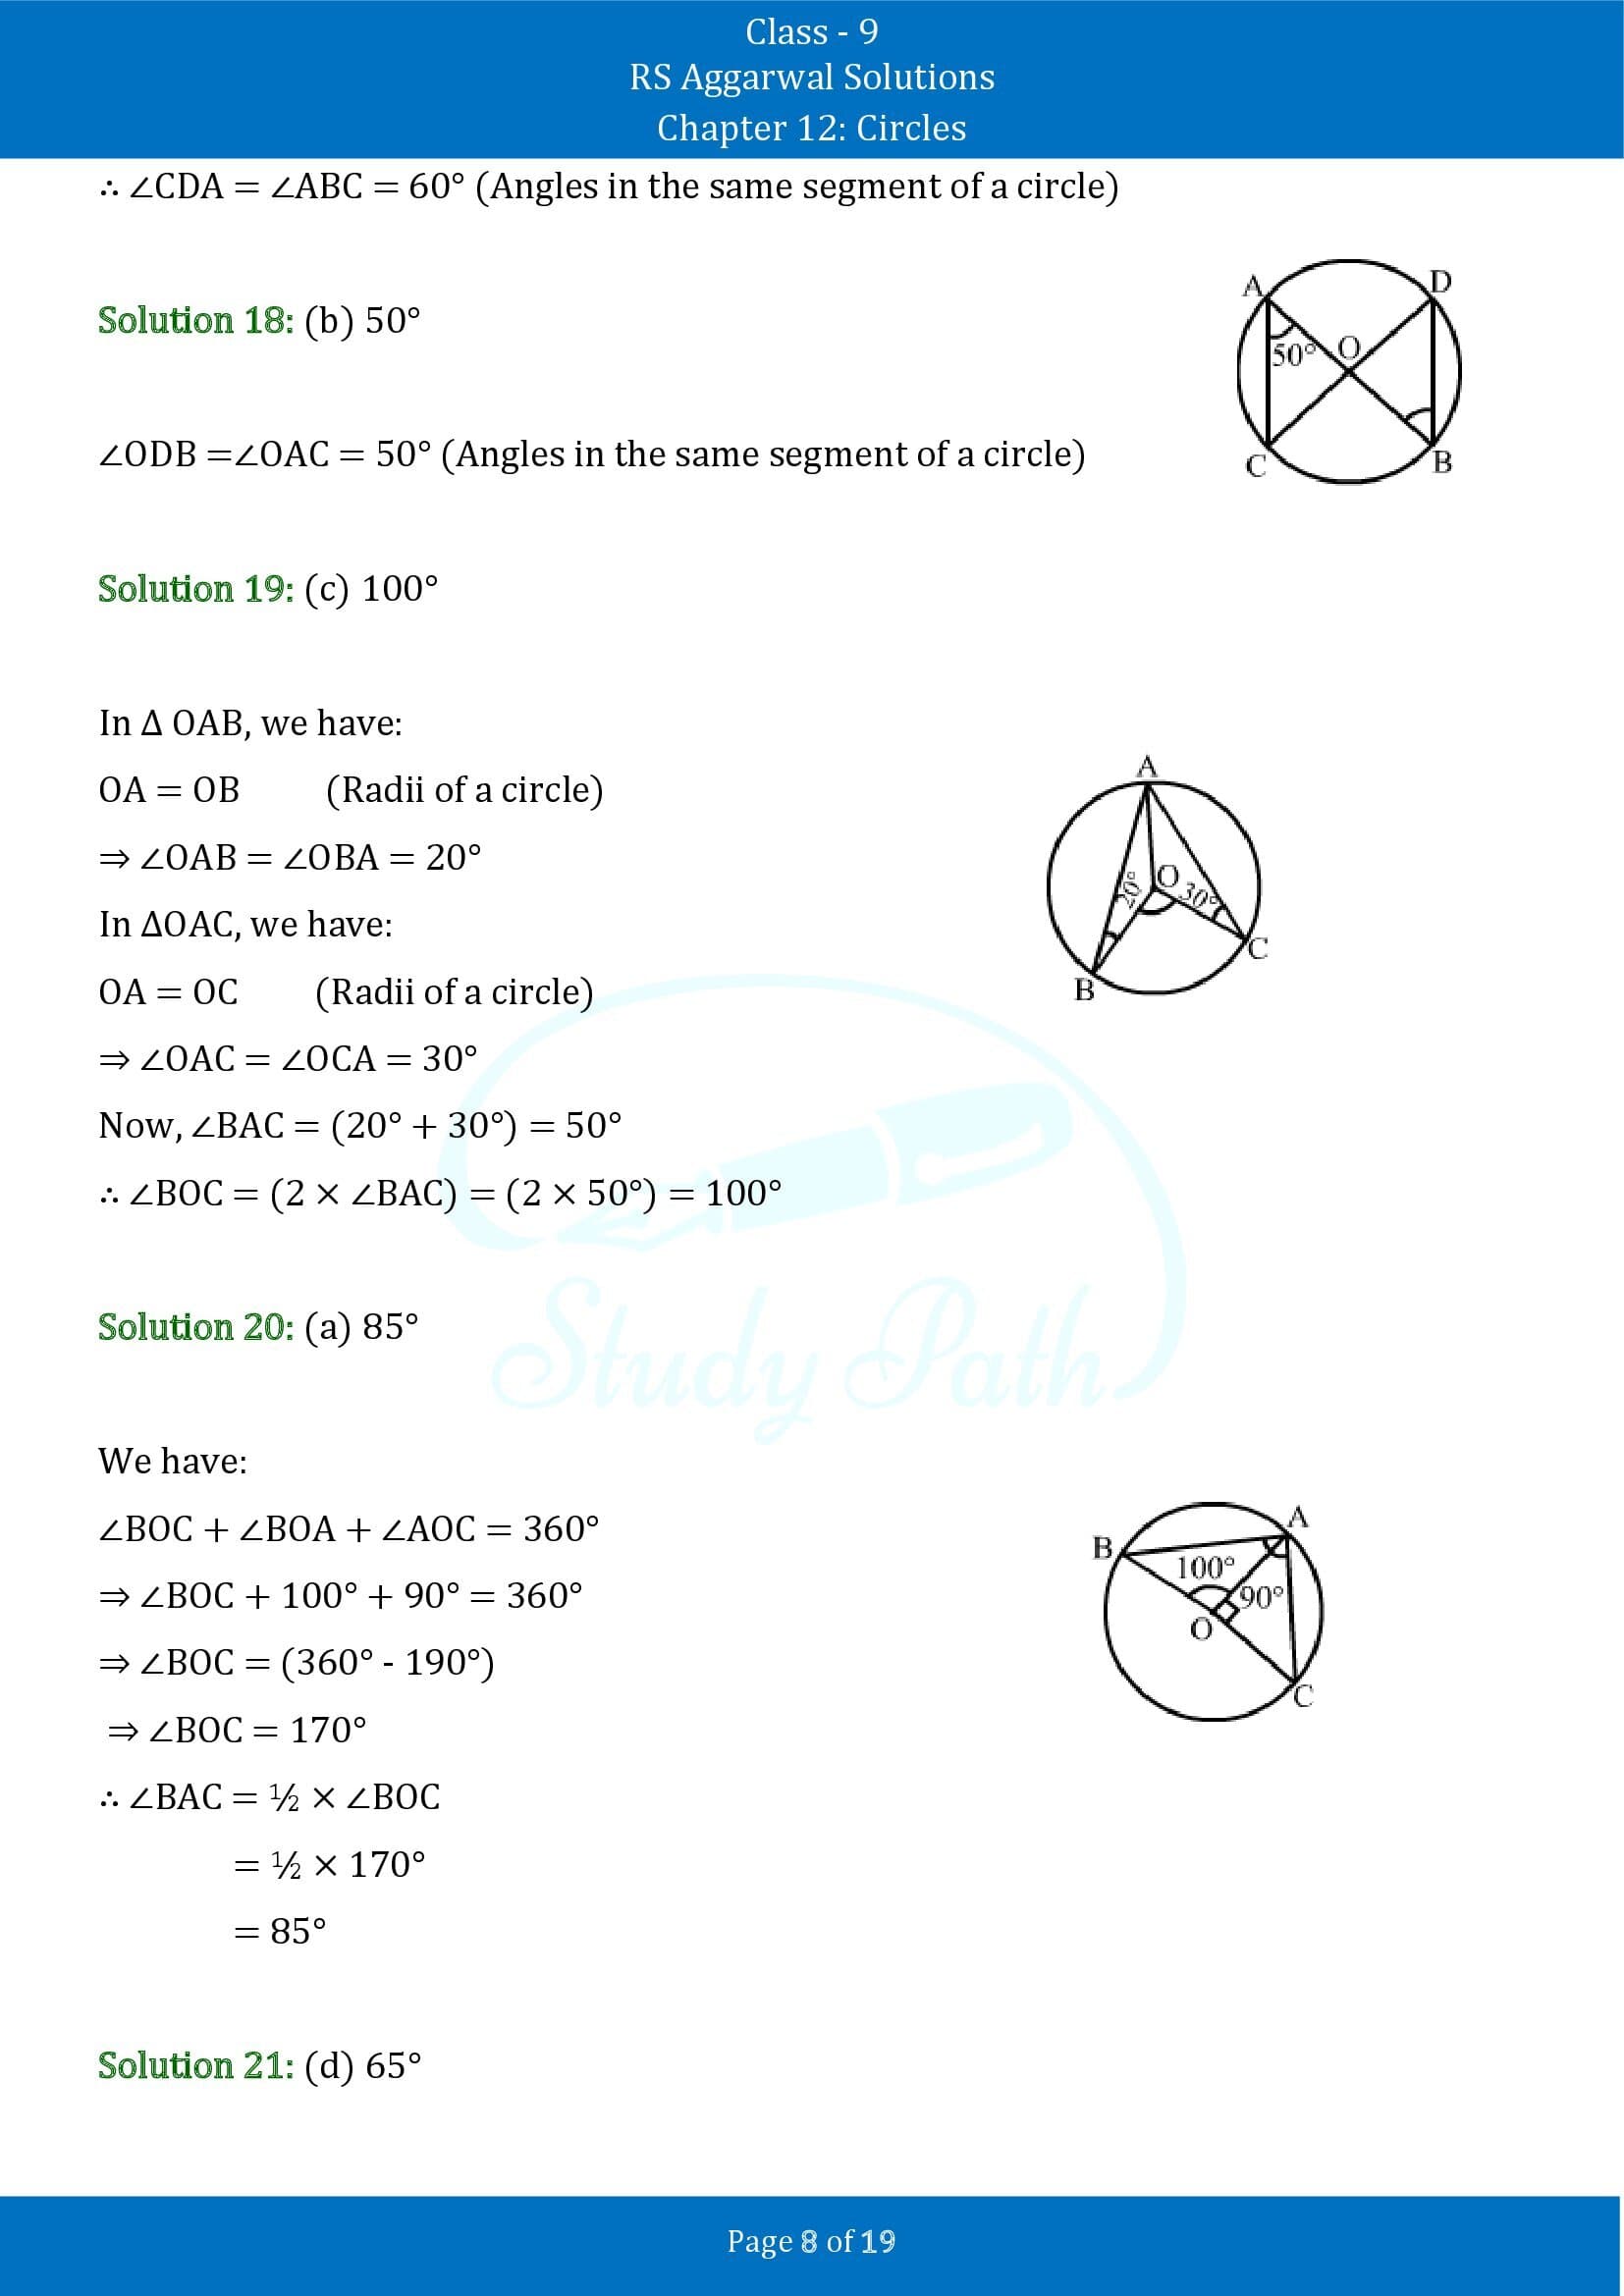 RS Aggarwal Solutions Class 9 Chapter 12 Circles Multiple Choice Questions MCQs 00008